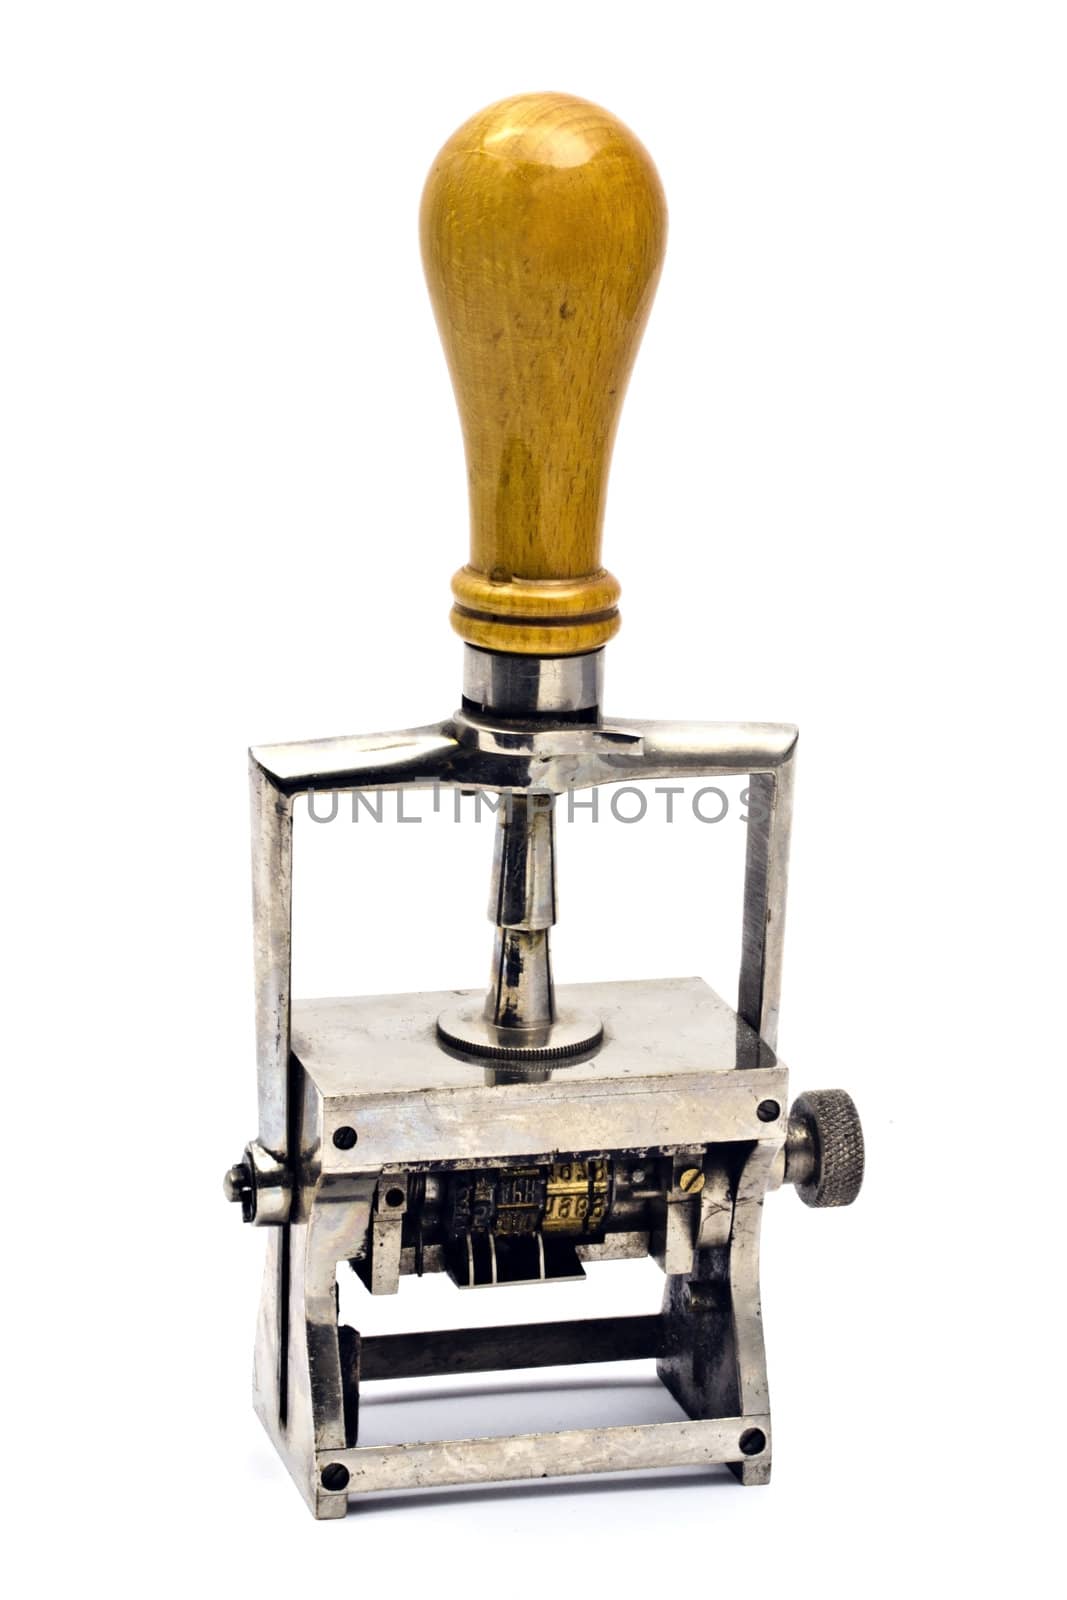 Old rubber stamp by ibphoto